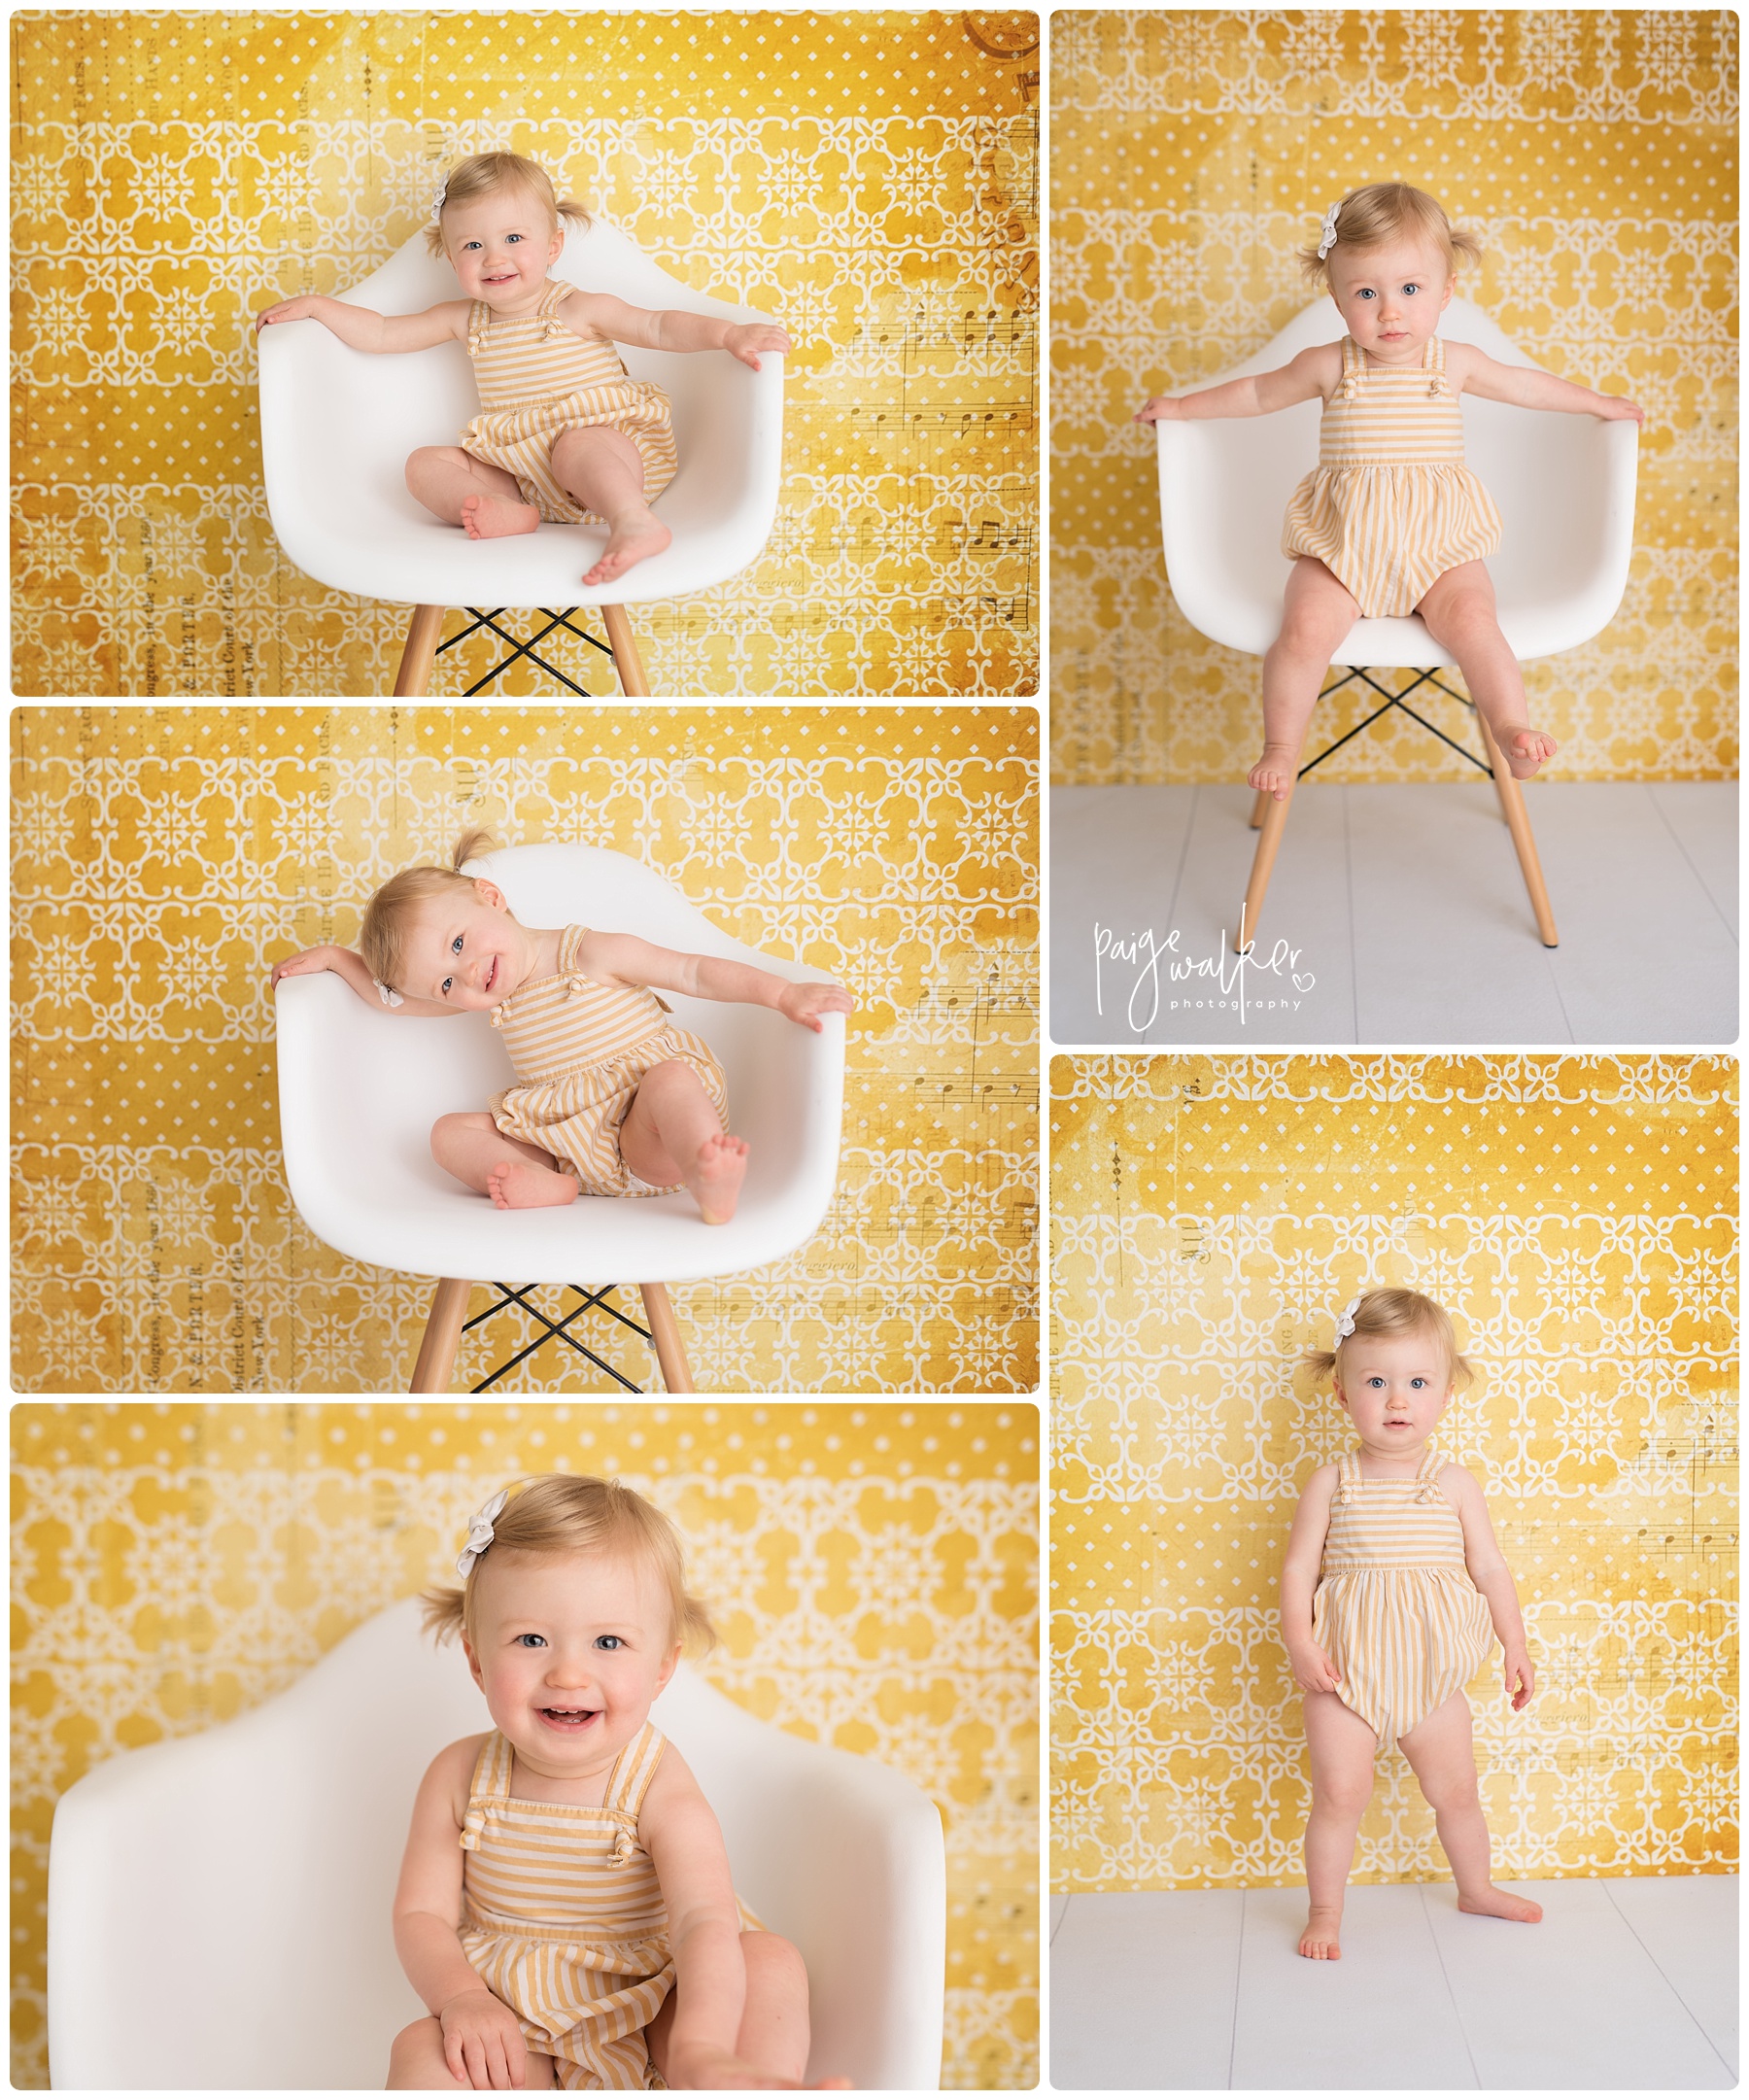 one year old girl playing in a white chair